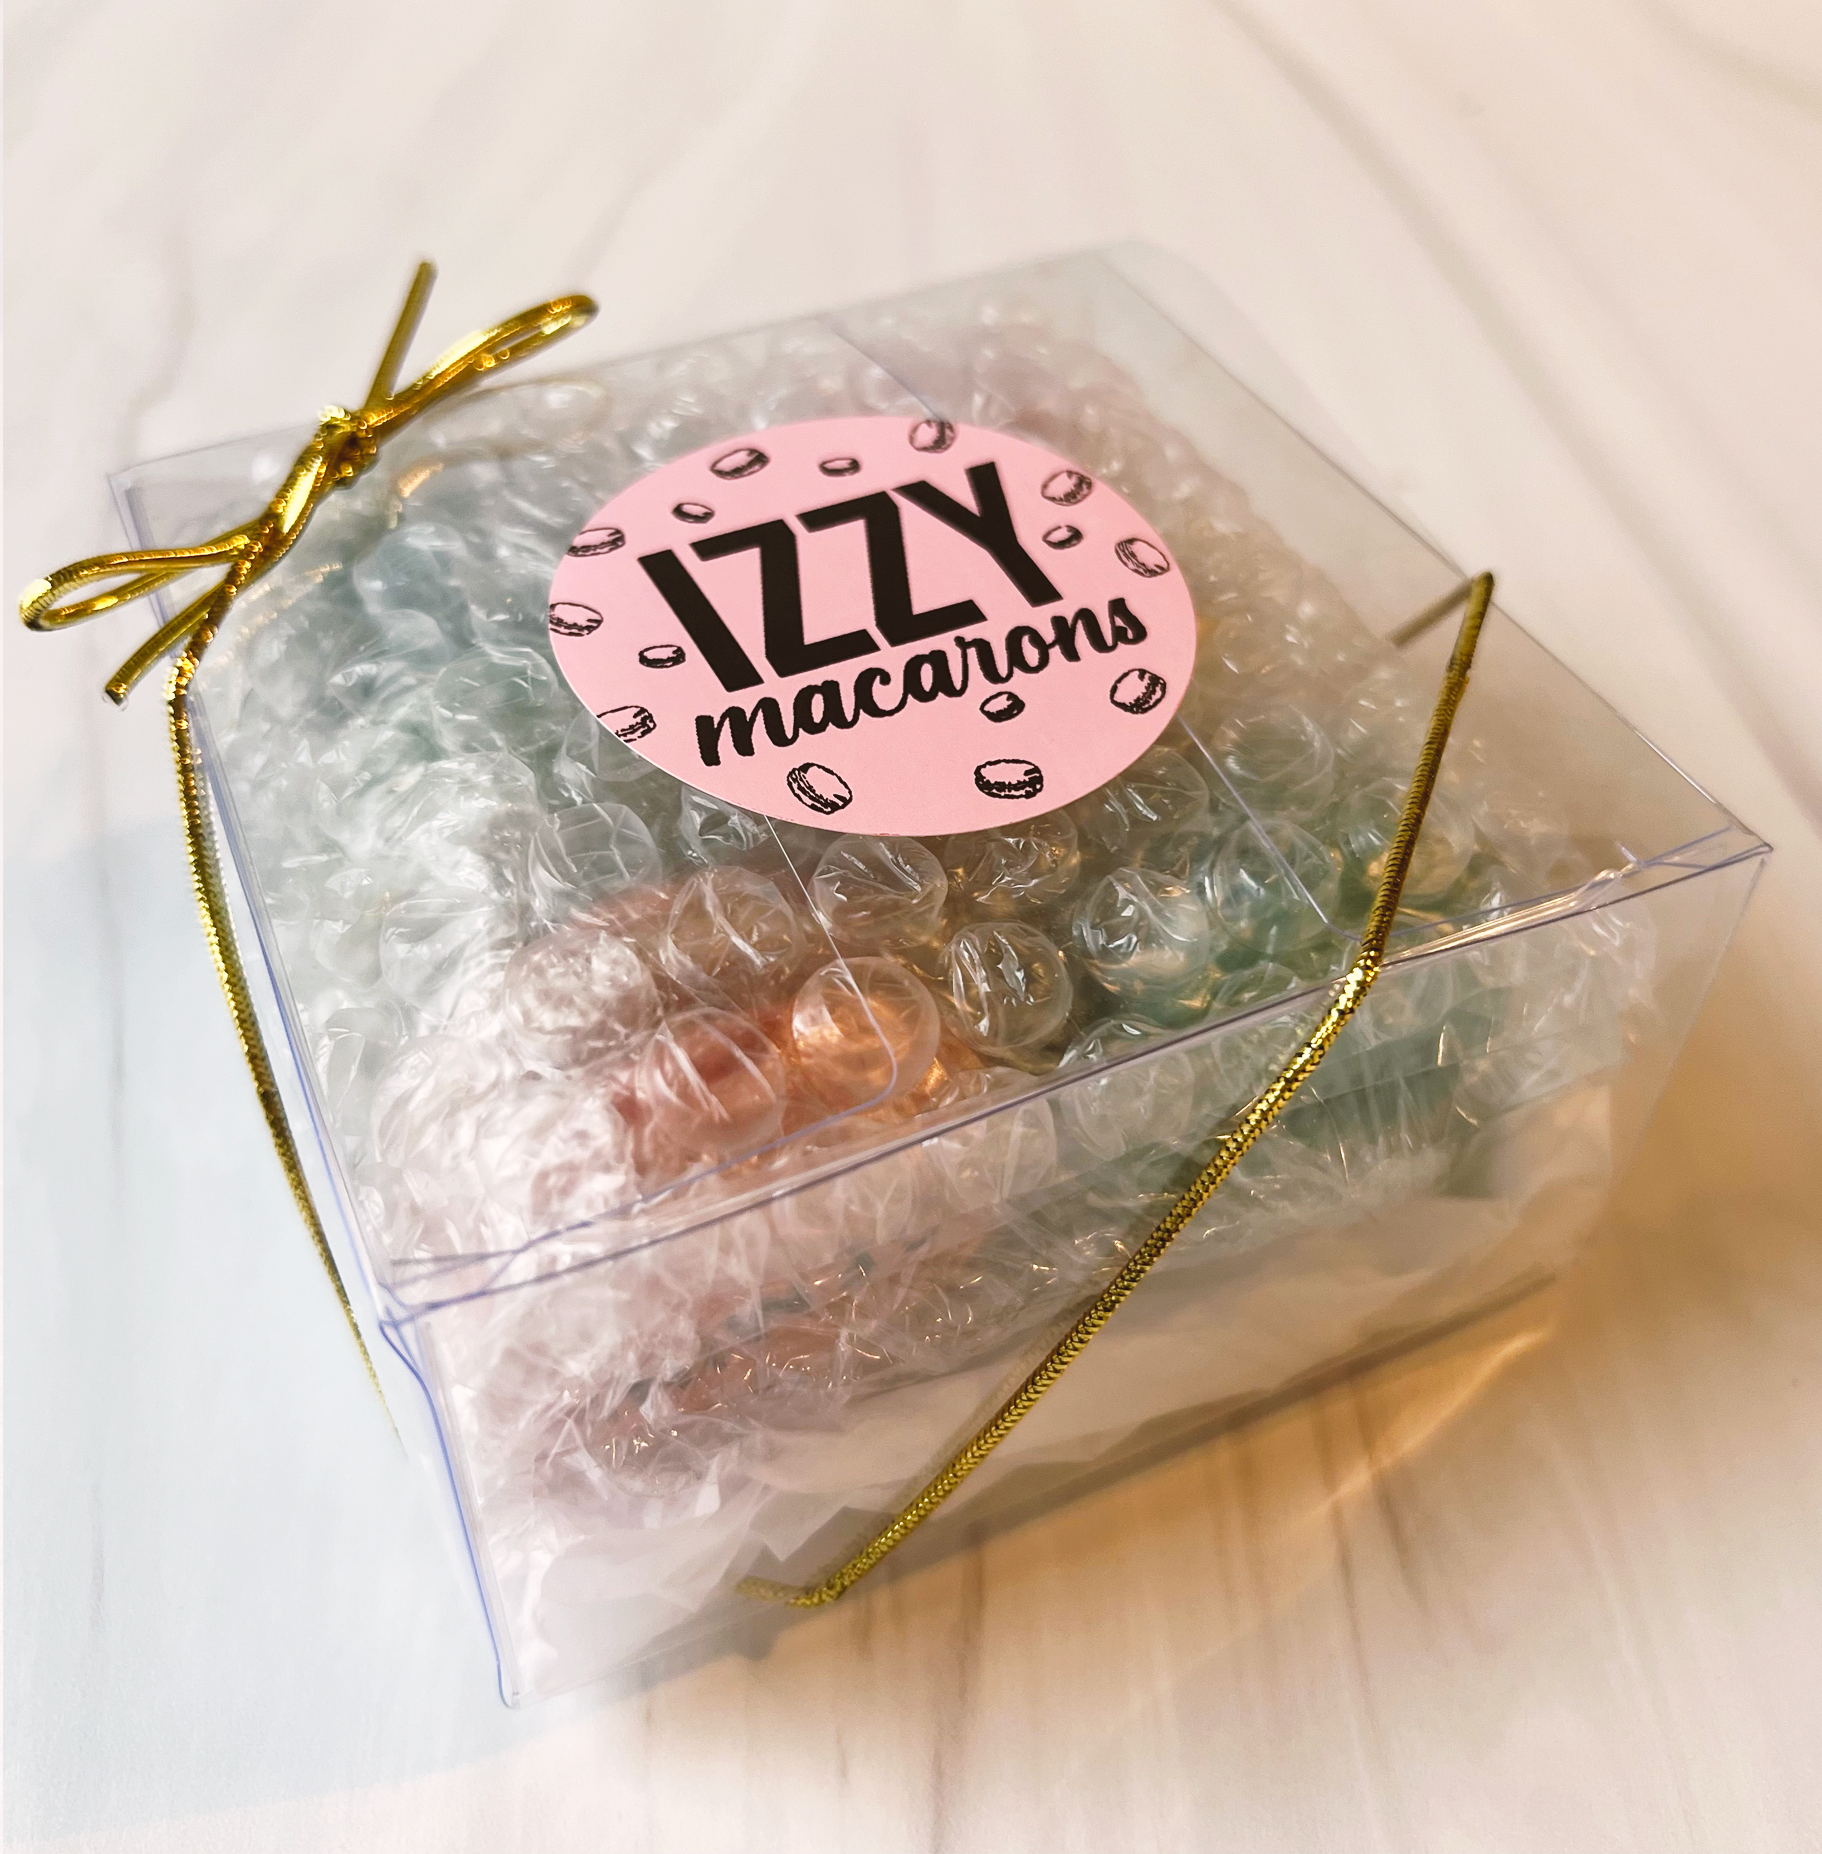 Mother's Day Flower Box - Izzy Macarons